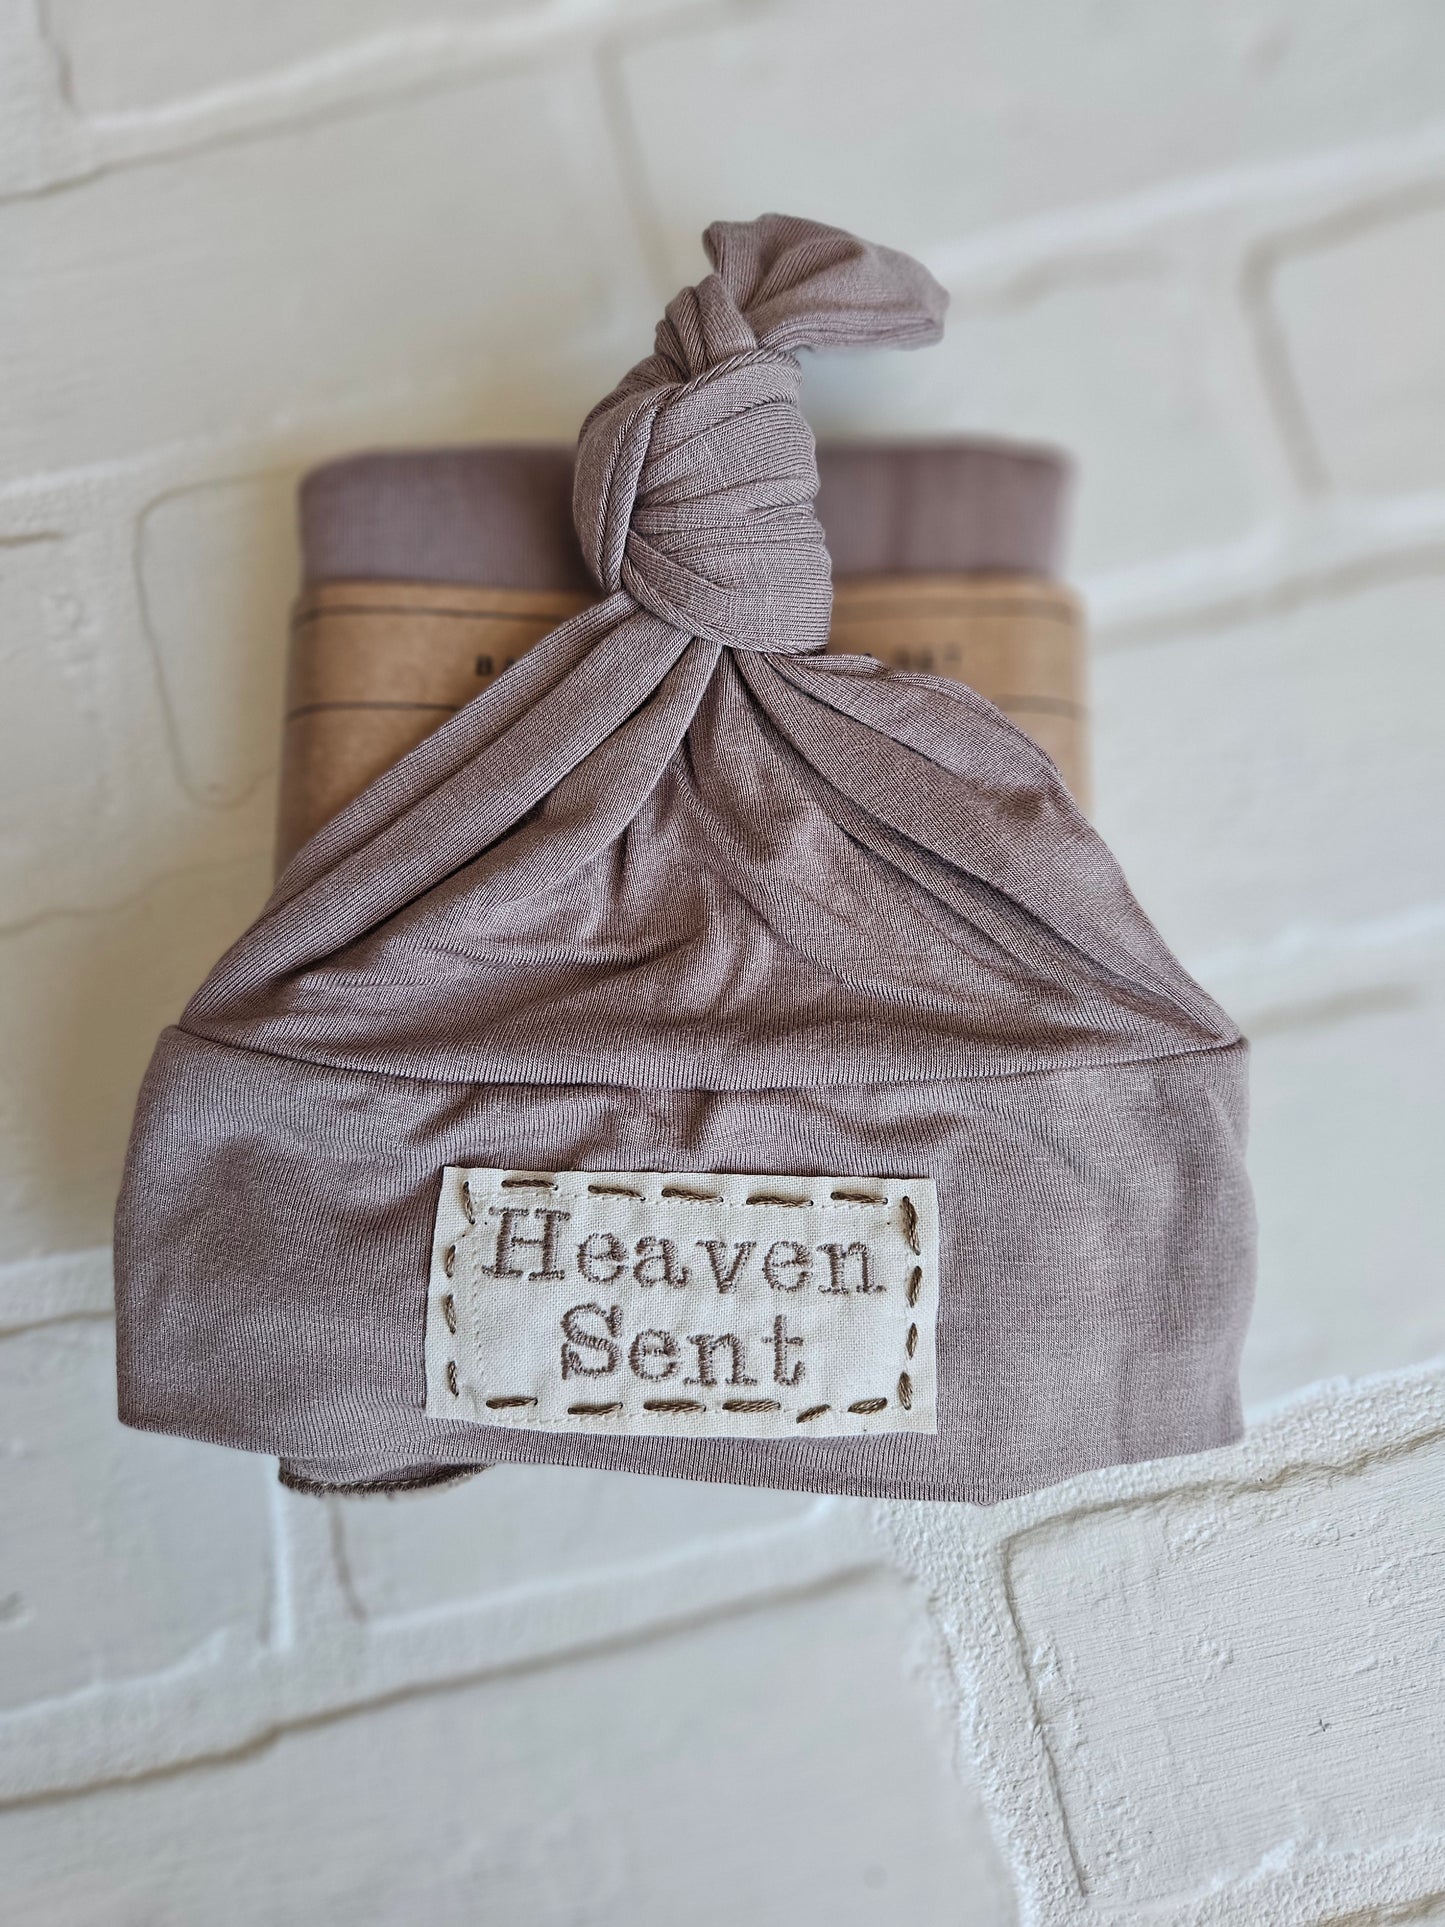 RTS: Personalized Sets: Hat/Swaddle - various options